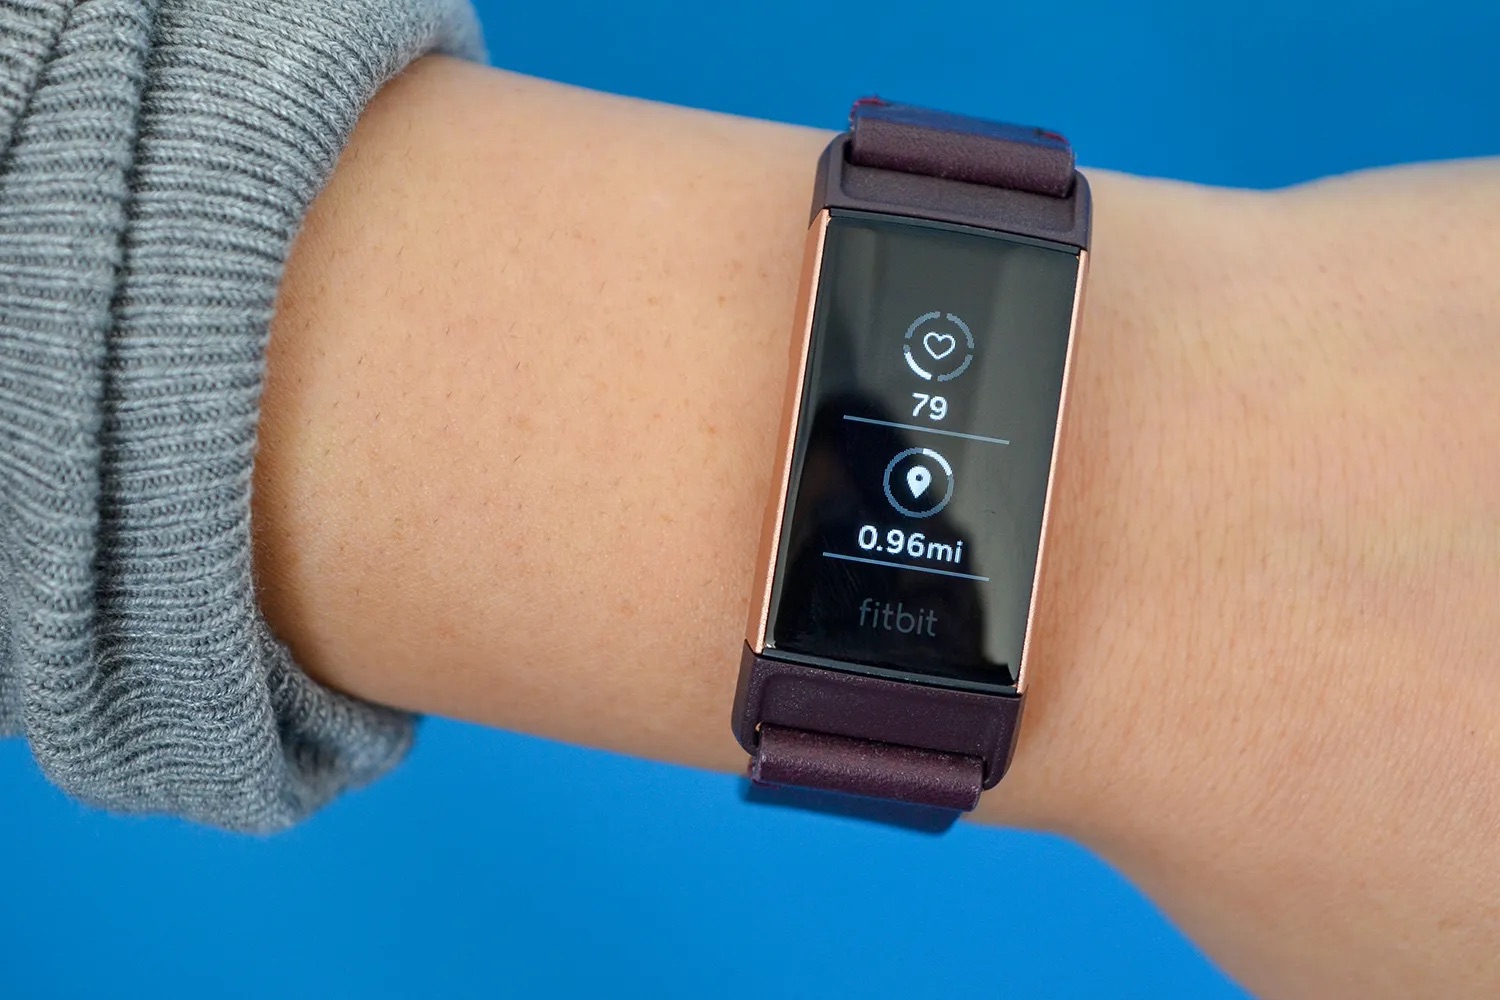 power-check-verifying-the-charge-status-of-fitbit-flex